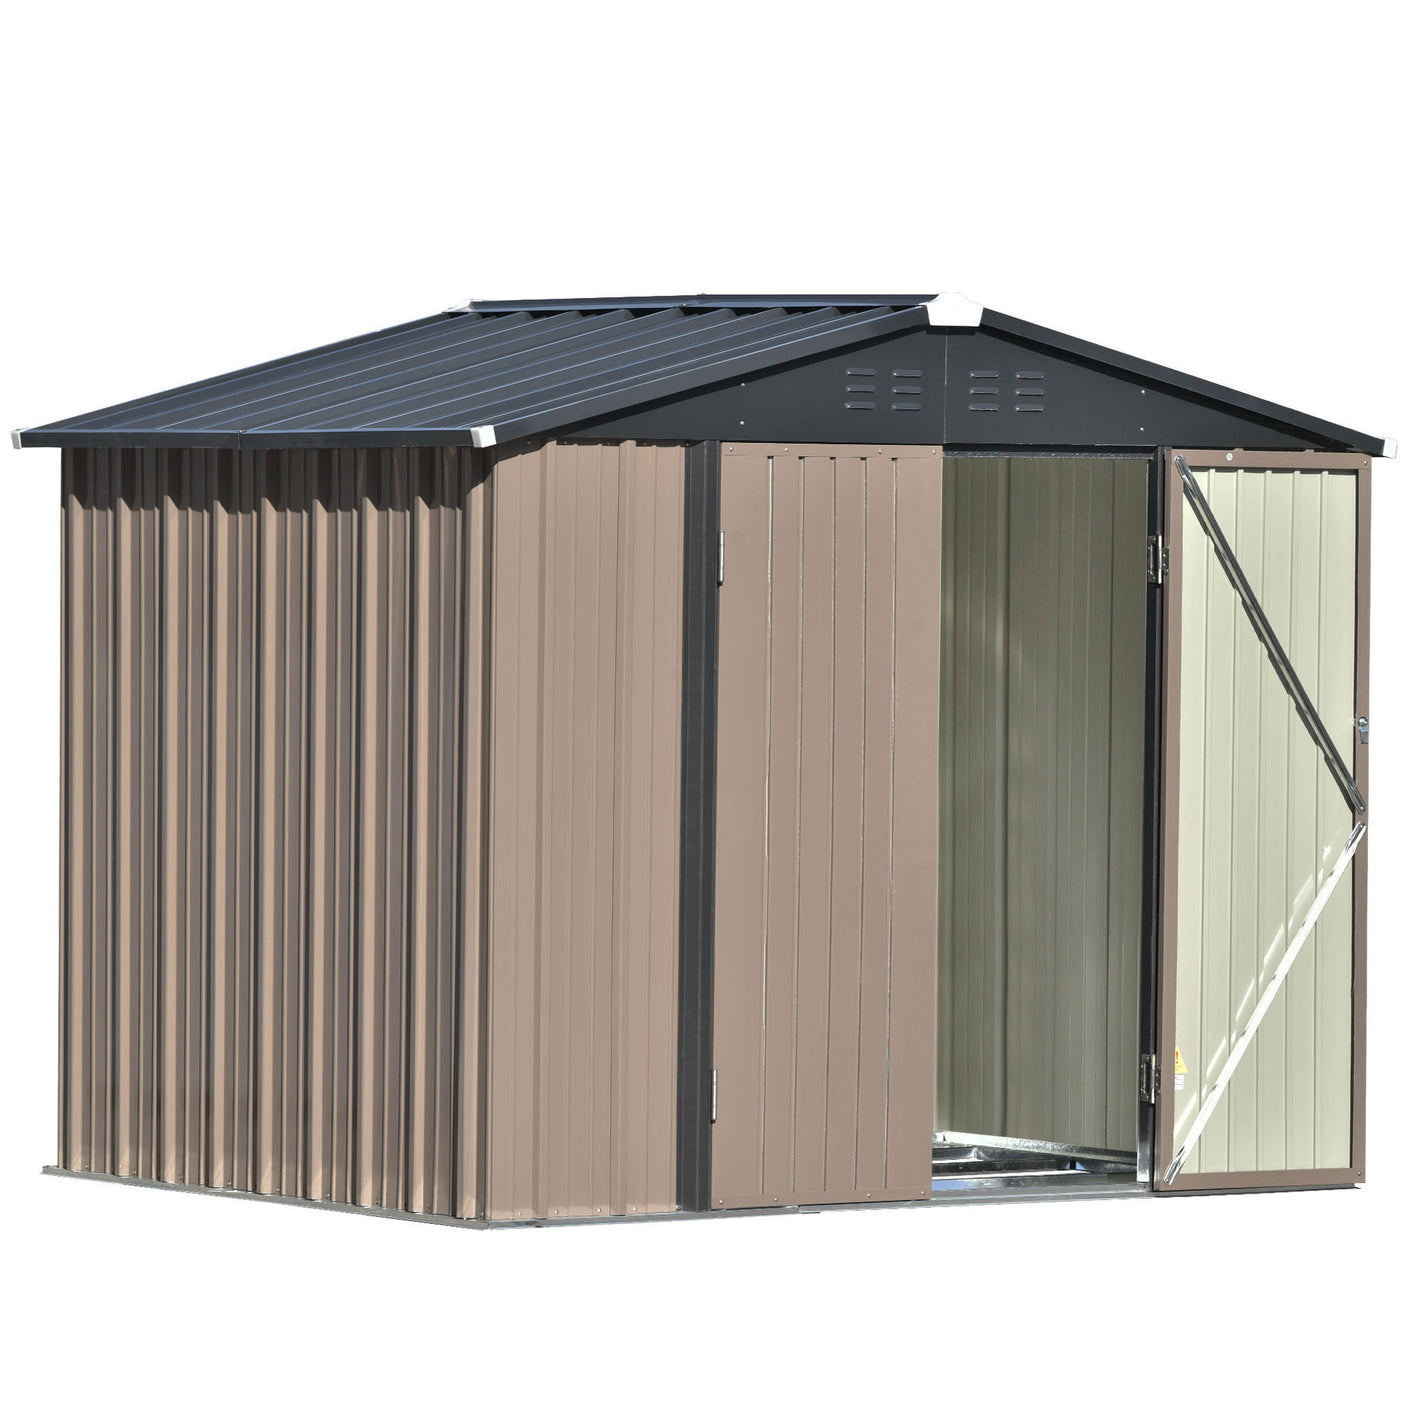 TOPMAX Patio 8ft x6ft Bike Shed Garden Shed, Metal Storage Shed with Lockable Doors, Tool Cabinet with Vents and Foundation Frame for Backyard, Lawn, Garden, Brown